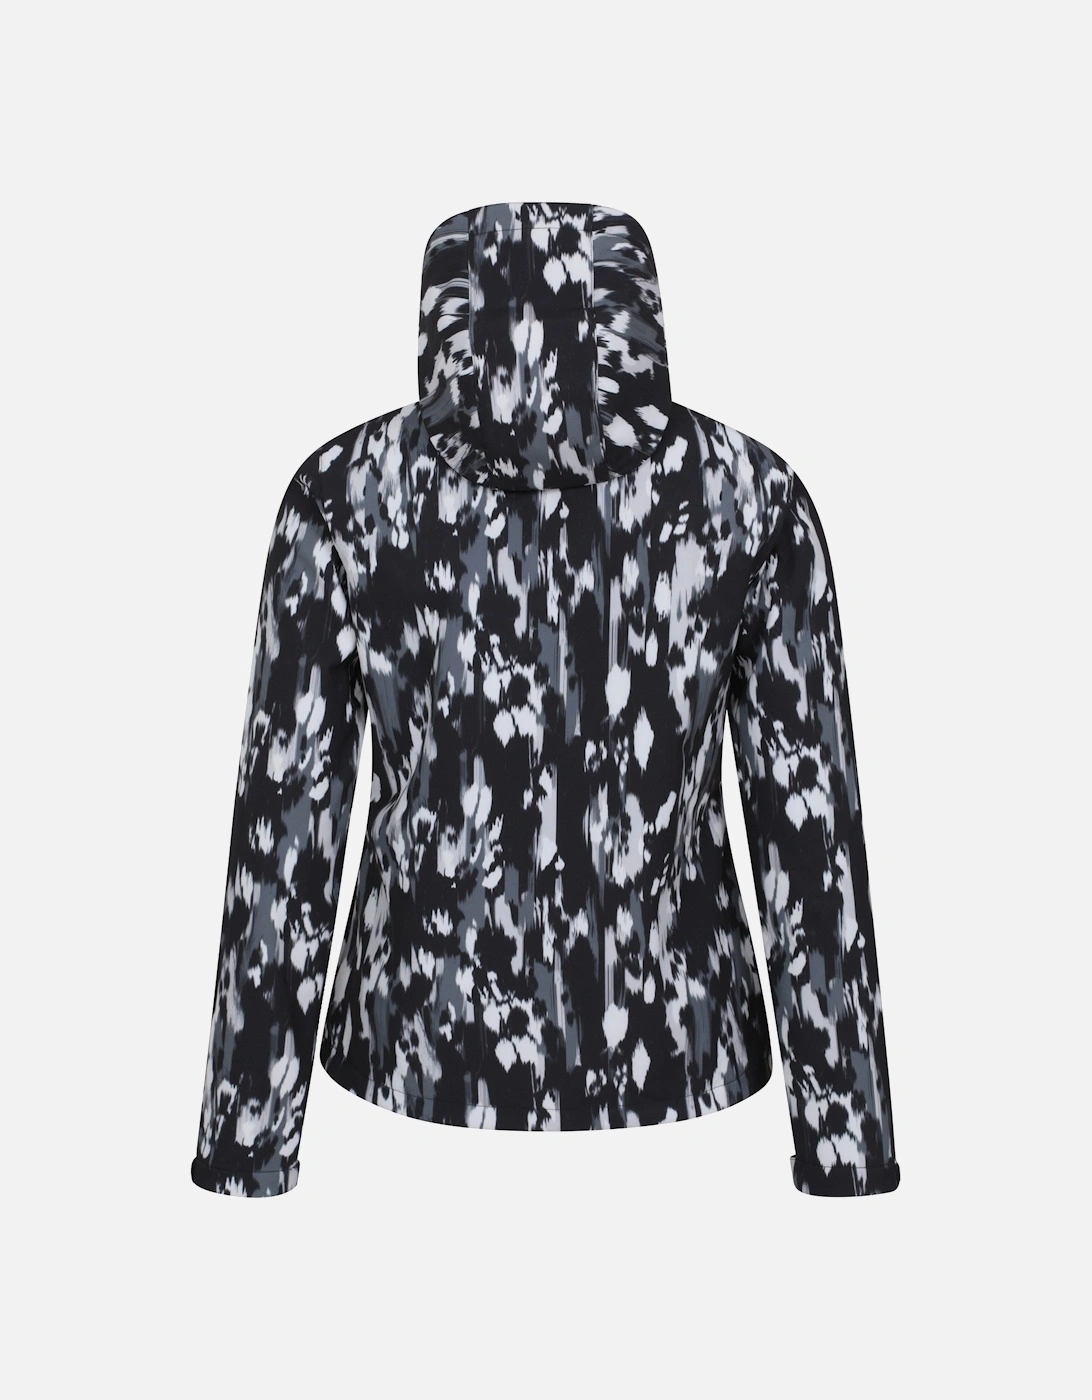 Womens/Ladies Exodus Patterned Water Resistant Soft Shell Jacket